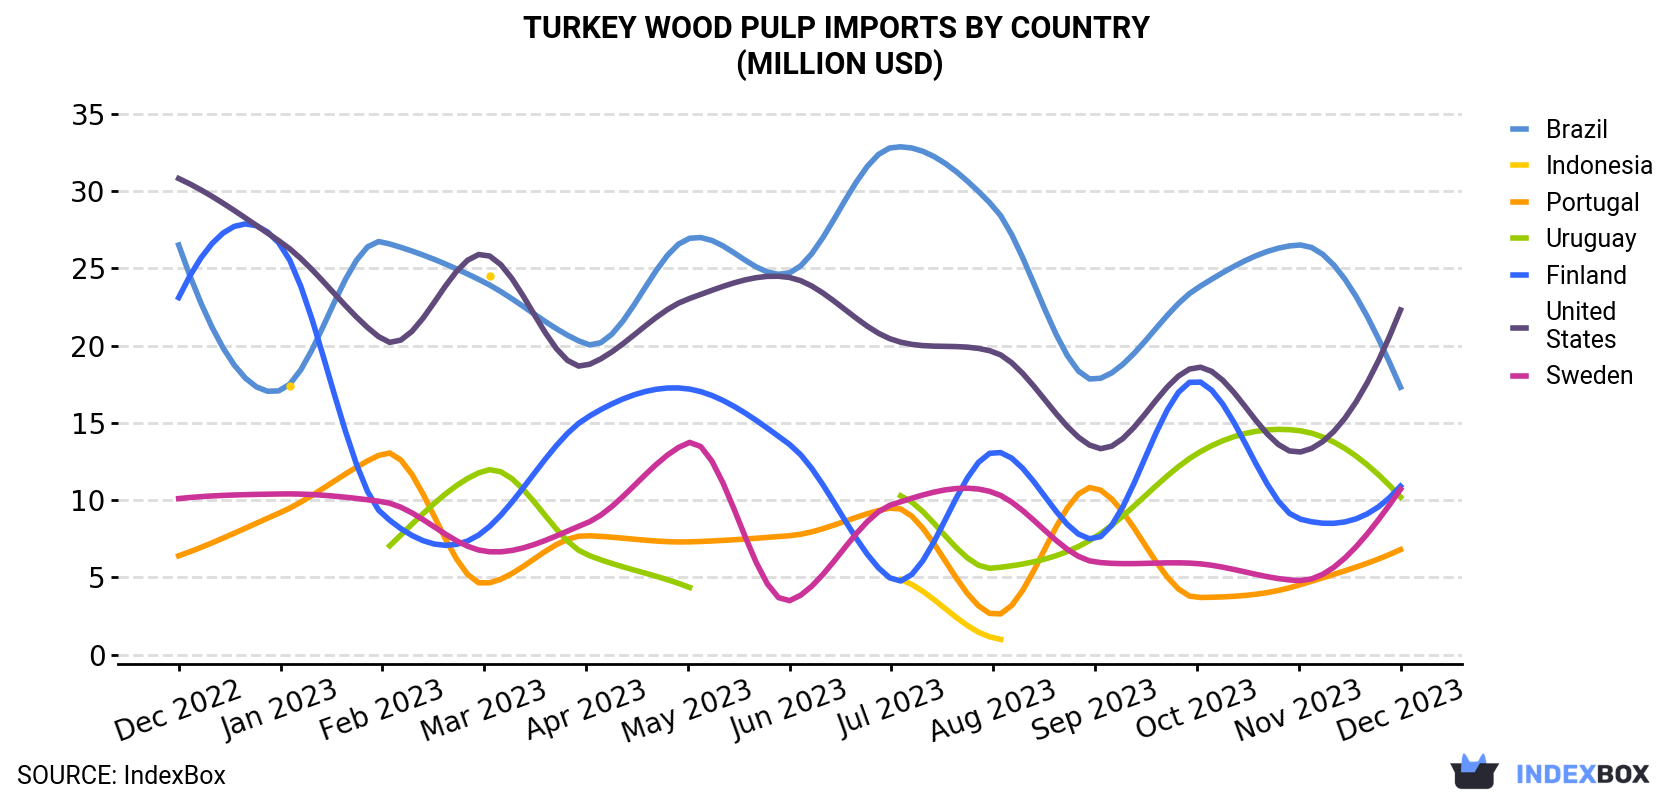 Turkey Wood Pulp Imports By Country (Million USD)